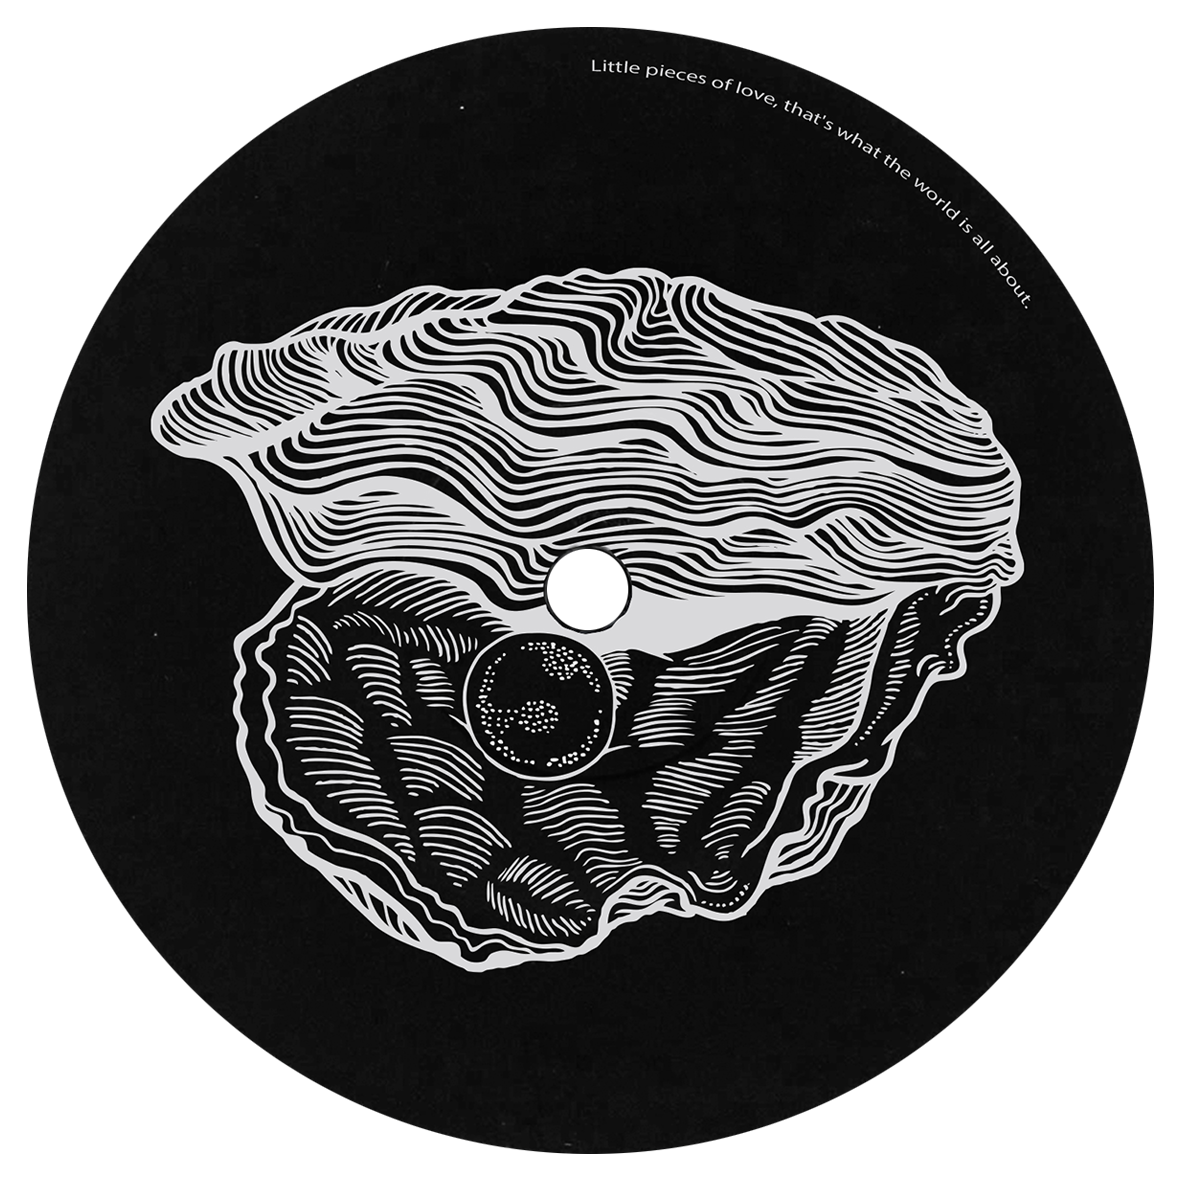 Syzygy / Fluid / Luke Warmwater - The Tri-Phase EP [NEW]